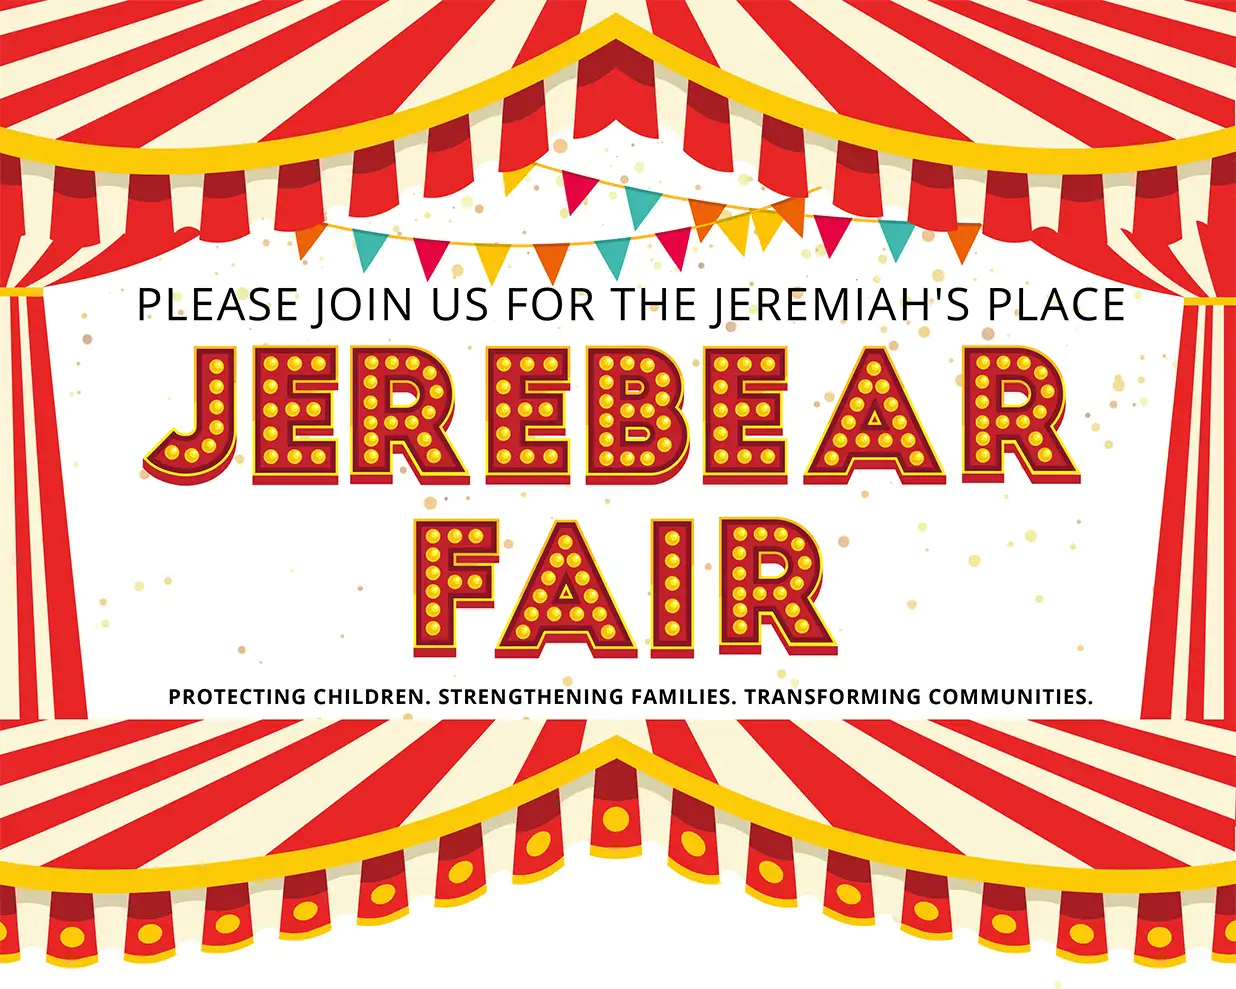 Jeremiah's Place JereBear Fair hero image in the design of a carnival or circus event